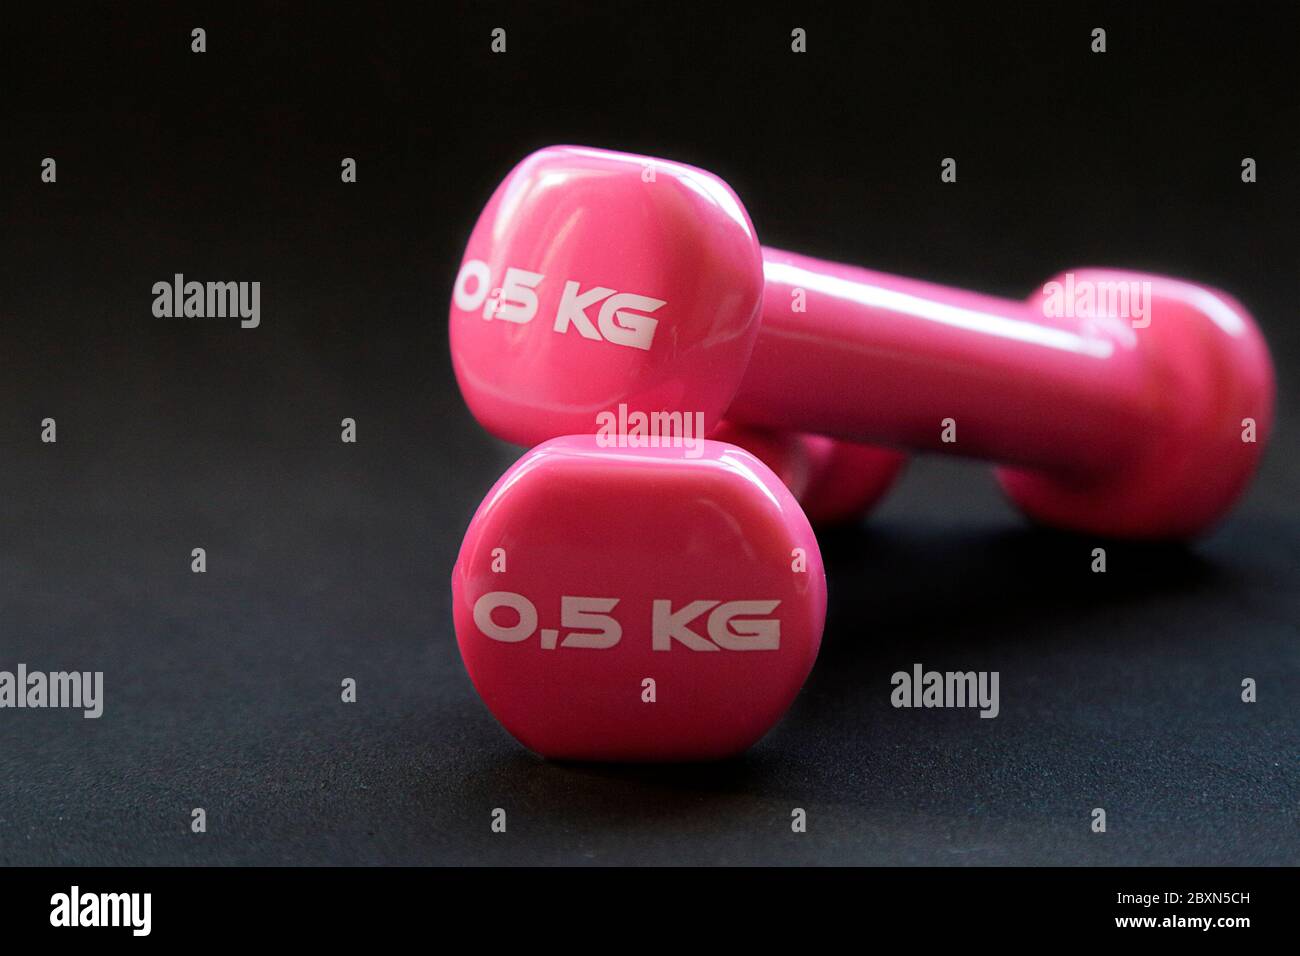 Pink dumbbells for fitness weighing 0.5 kg over a black background Stock Photo